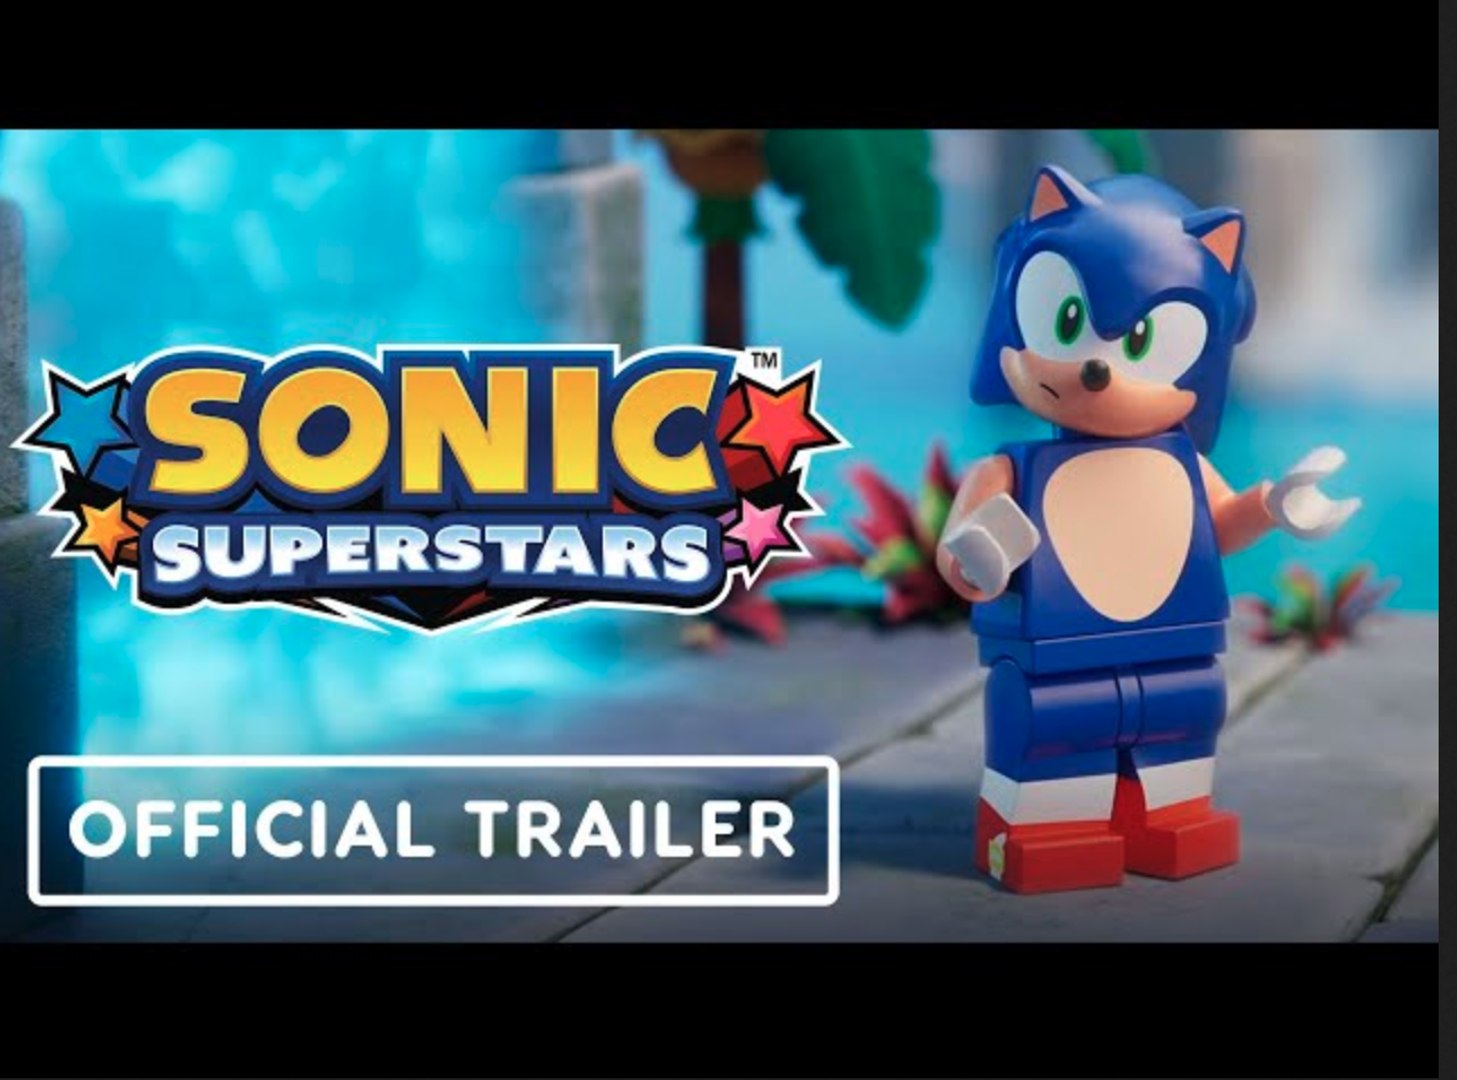 LEGO Dimensions - Sonic Gameplay Trailer